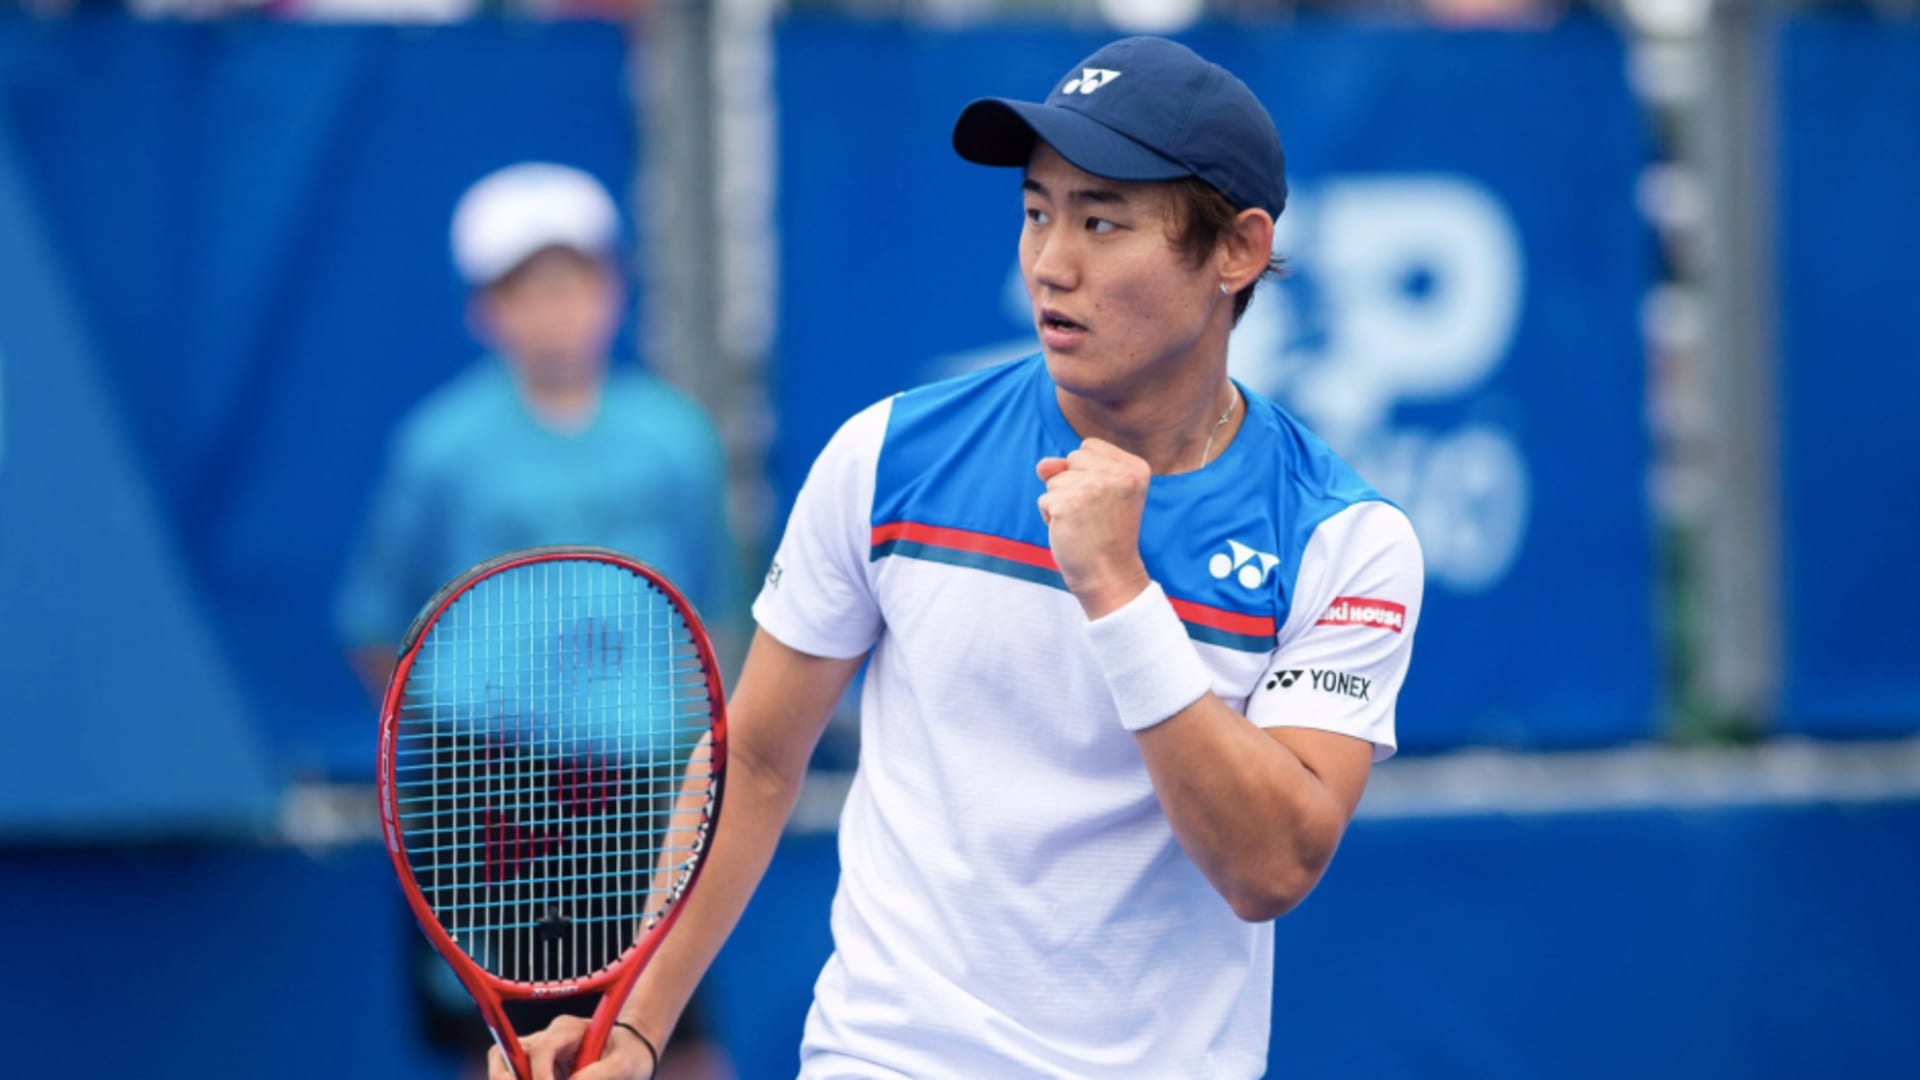 Nishioka pulls off yet another comeback victory to reach Delray final